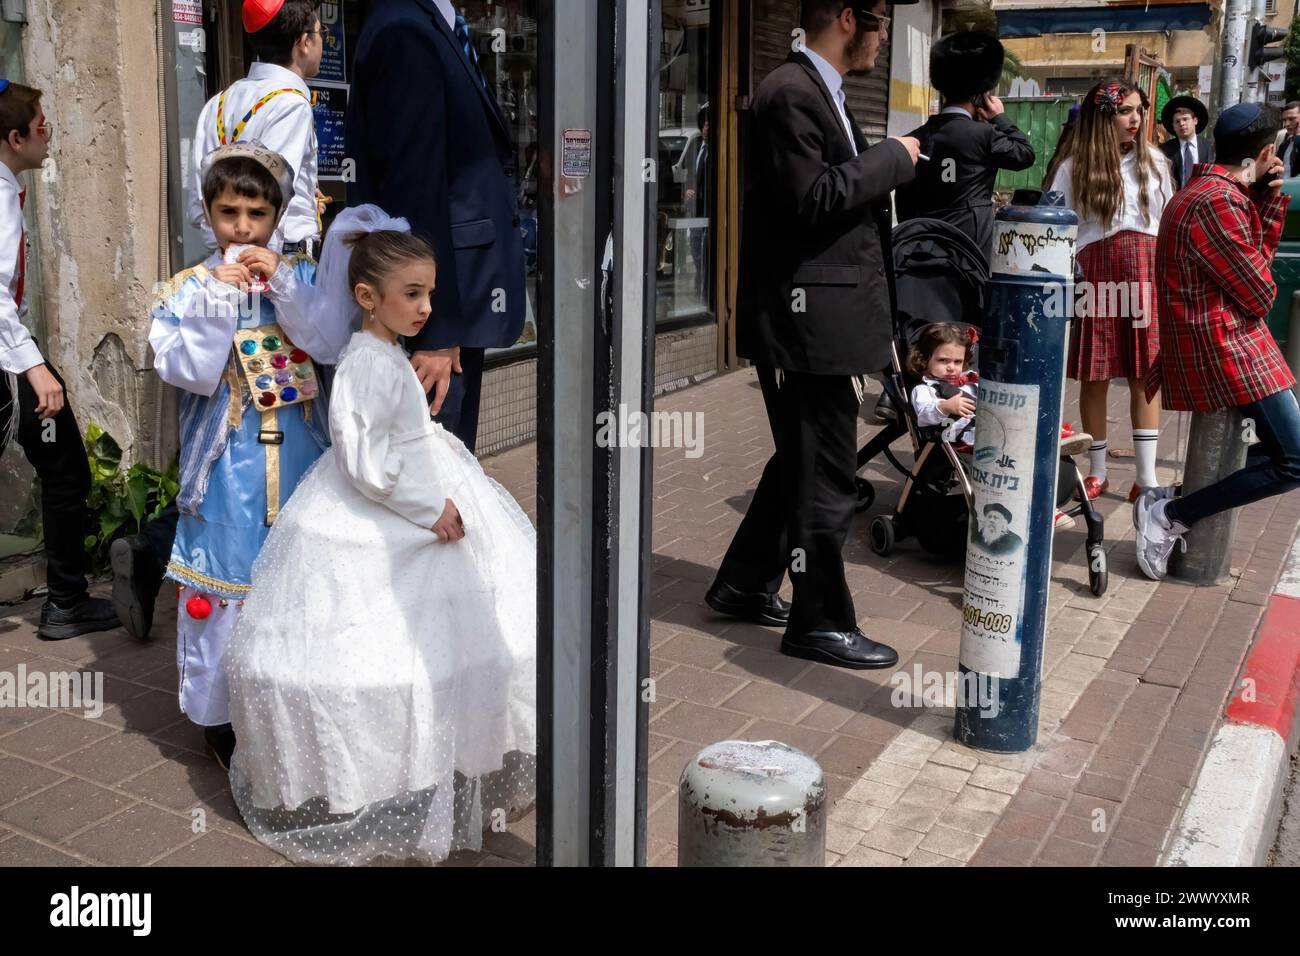 Bnei Brak, Israel. 24th Mar, 2024. A girl is seen dressed in a white dress as Queen Esther and a boy next to her is dressed as a ''Cohen'', or high priest, according to Jewish Tradition during the Purim celebration. Ultra-Orthodox Jews Celebrate Purim in Bnei Brak, Israel. The holiday commemorates the salvation of the Jews in ancient Persia from a plot to annihilate them. A joyous holiday, it is celebrated by both secular and nonsecular Jews, most notably by dressing up in costumes and drinking, according to the Talmud, 'until they cannot distinguish between ''˜cursed is Haman' and ''˜bles Stock Photo